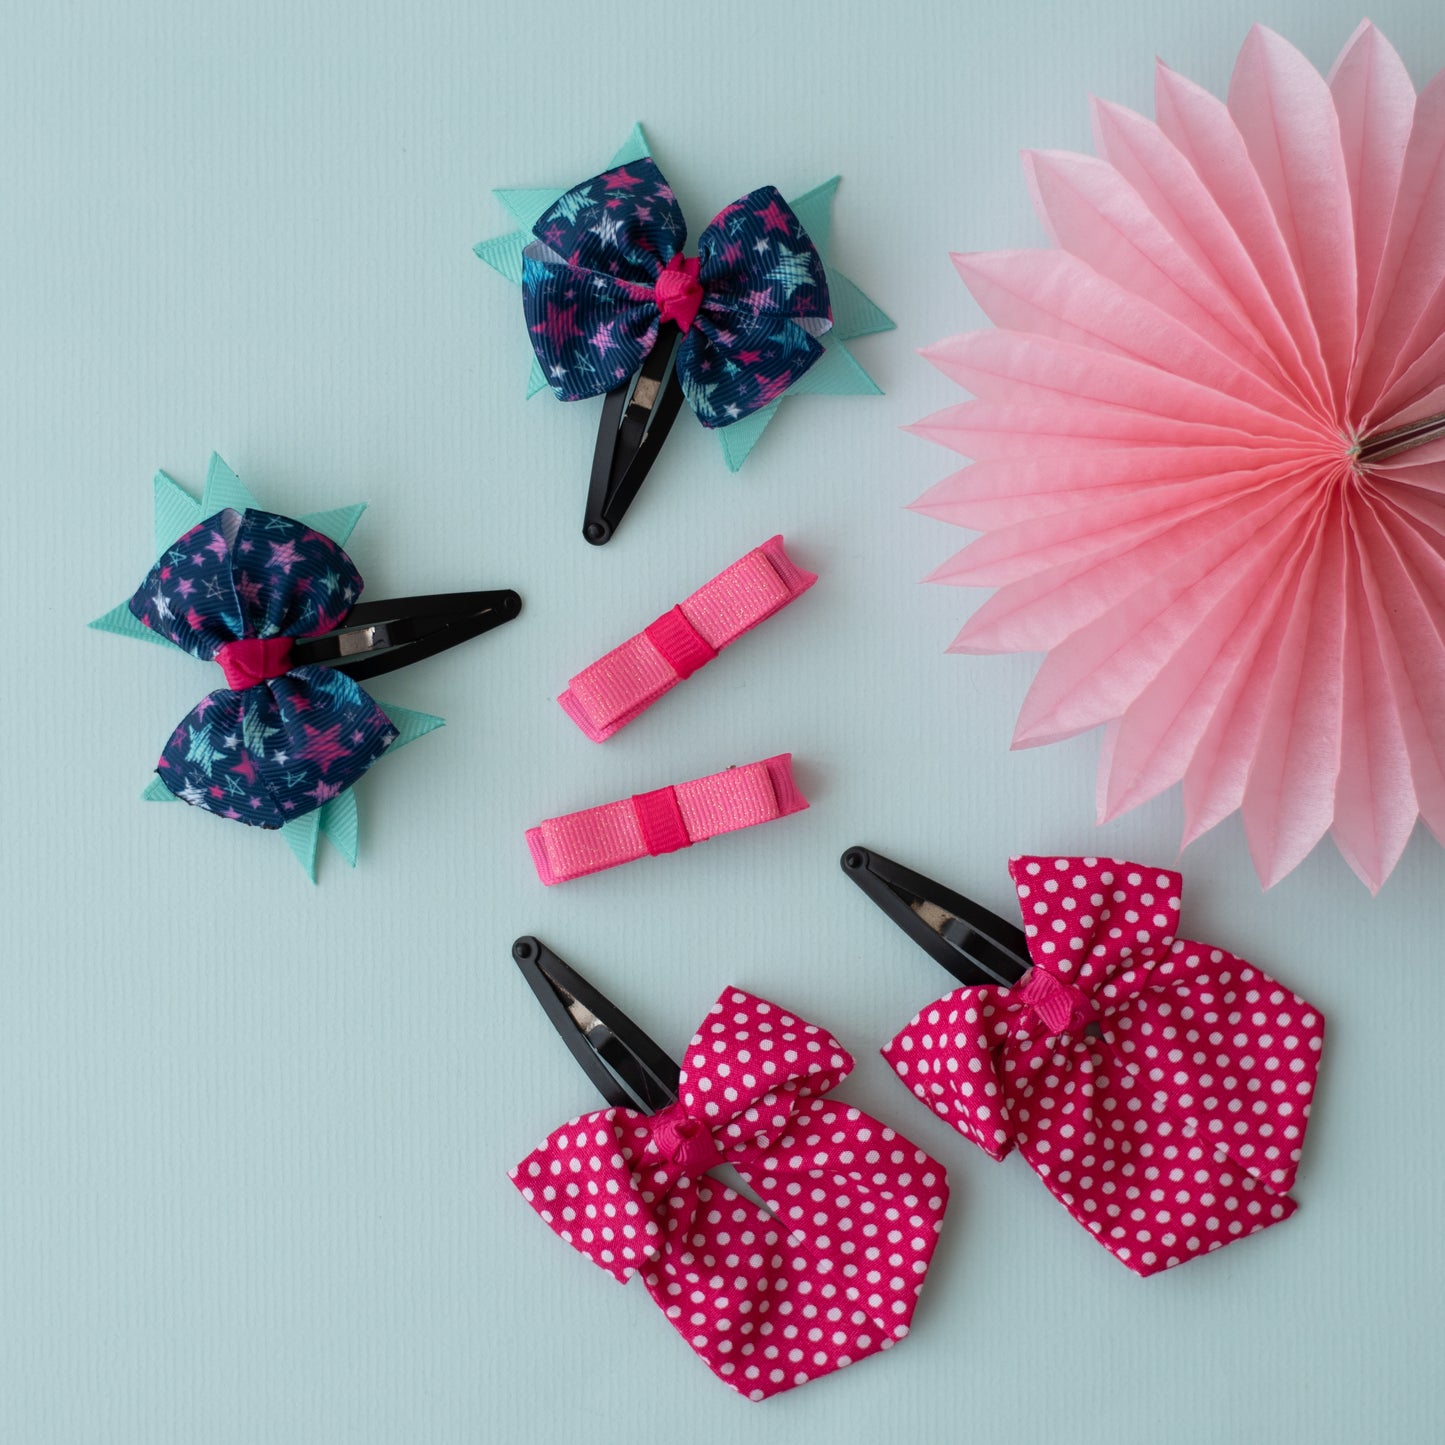 Combo: Elegant polka dotted bow on tic-tac pins, loopy bow on alligator clips along with cute and fancy bow on tic-tac pins - Pink, Navy blue